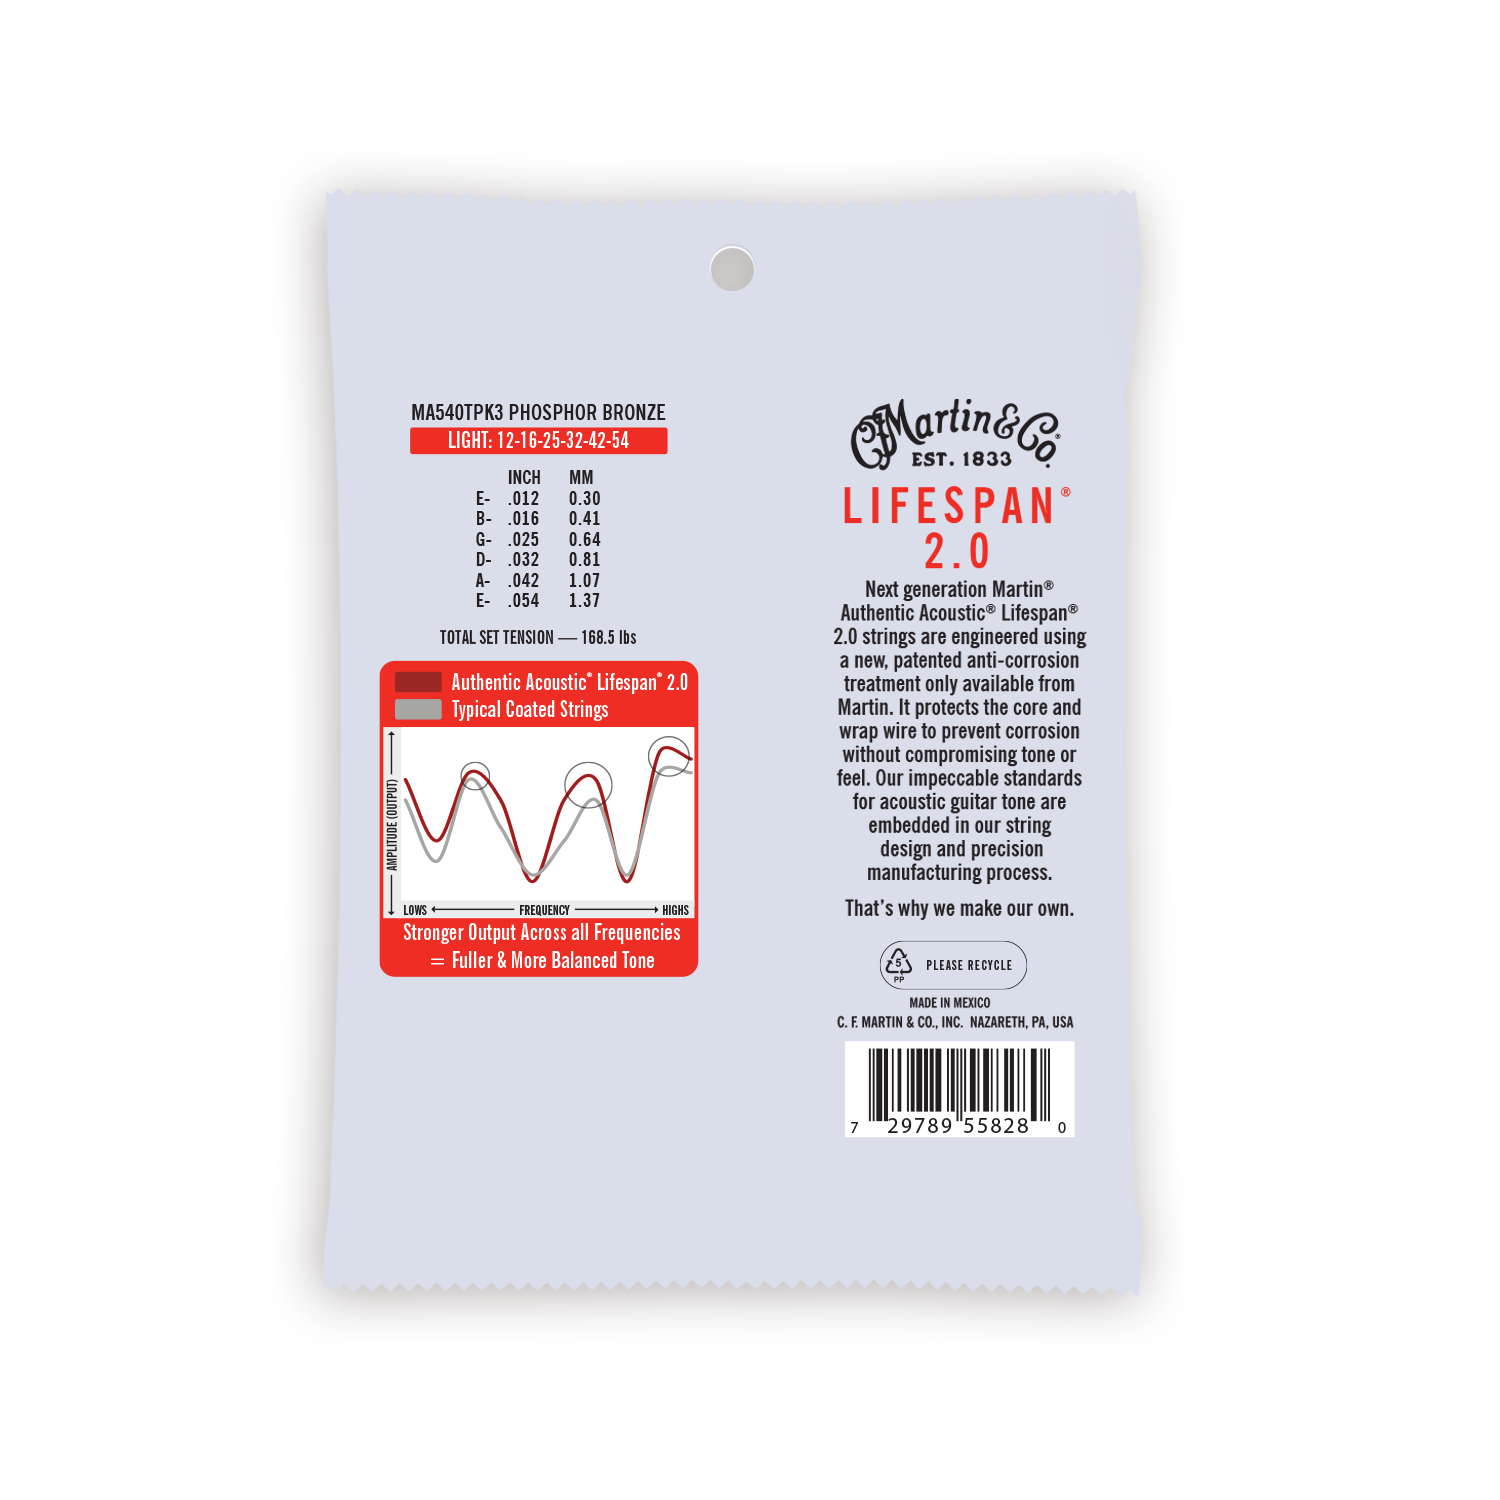 Martin Authentic Acoustic Lifespan® 2.0 Guitar Strings (MA540T Pack 3)